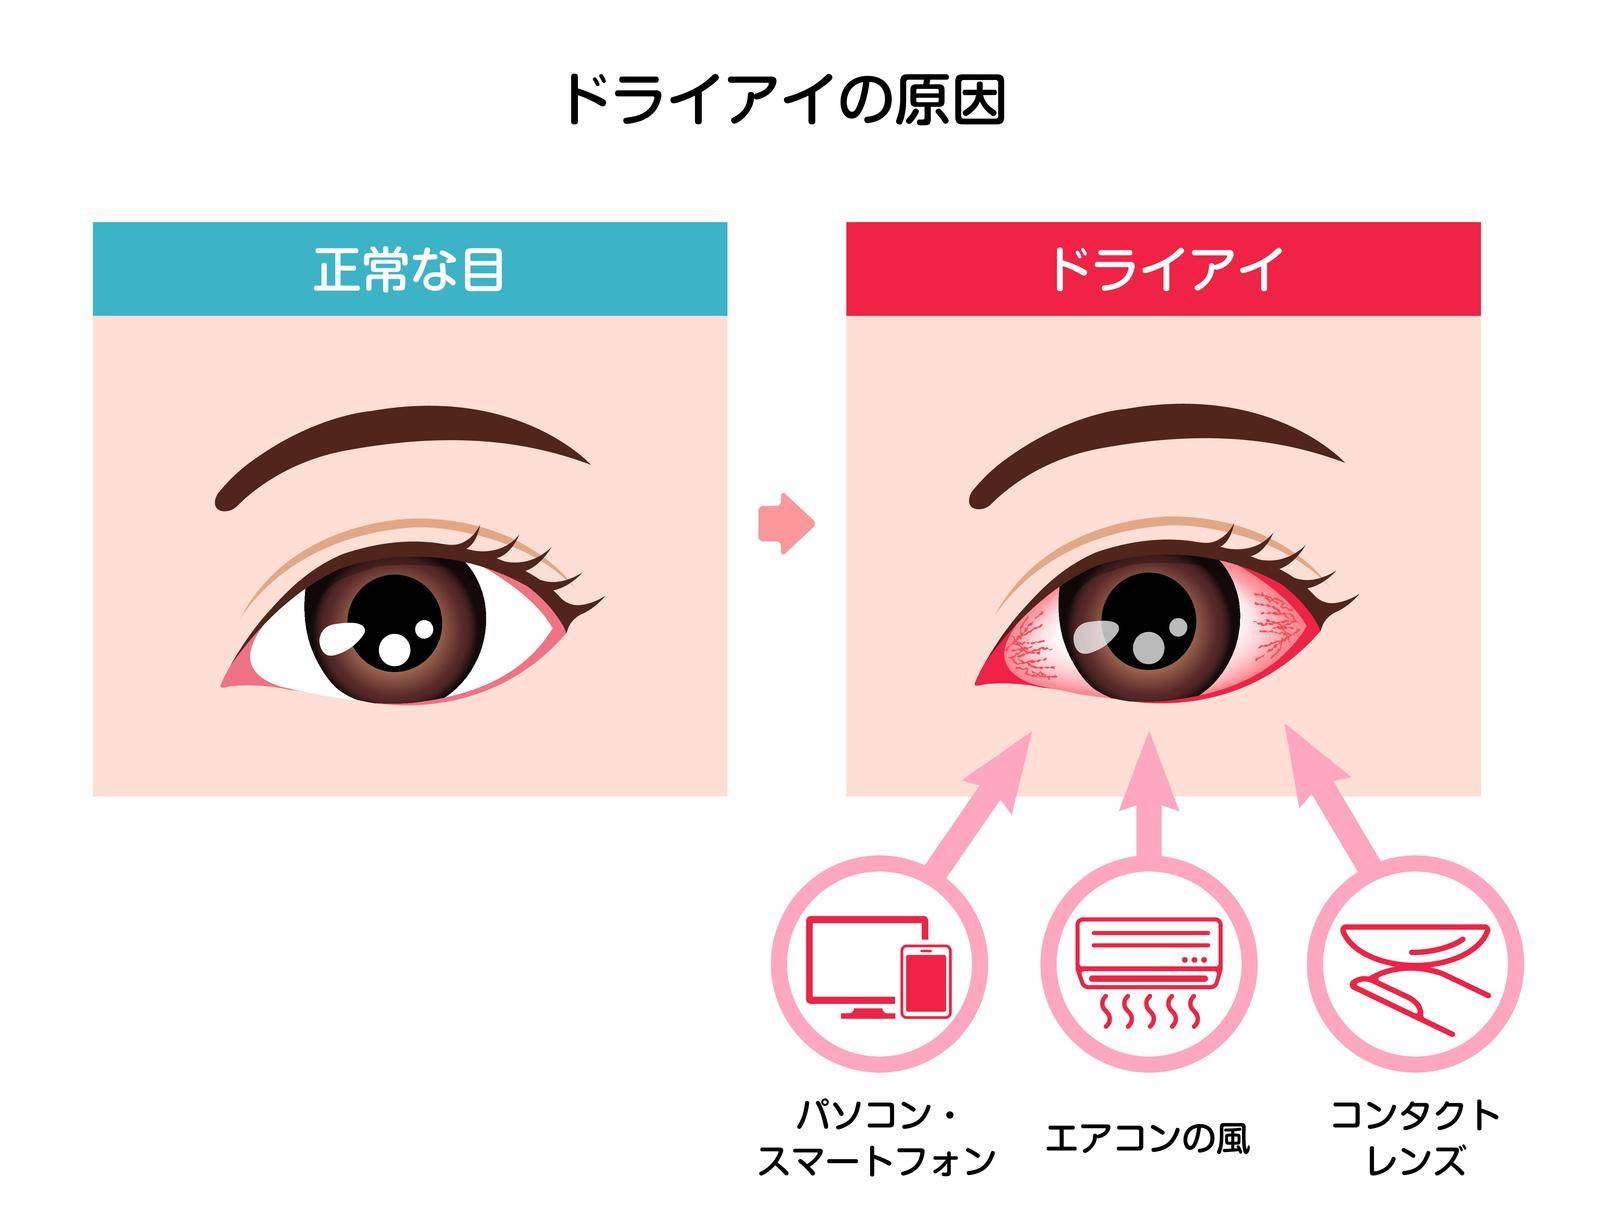 Causes of dry eye vector illustration (Japanese) by barks